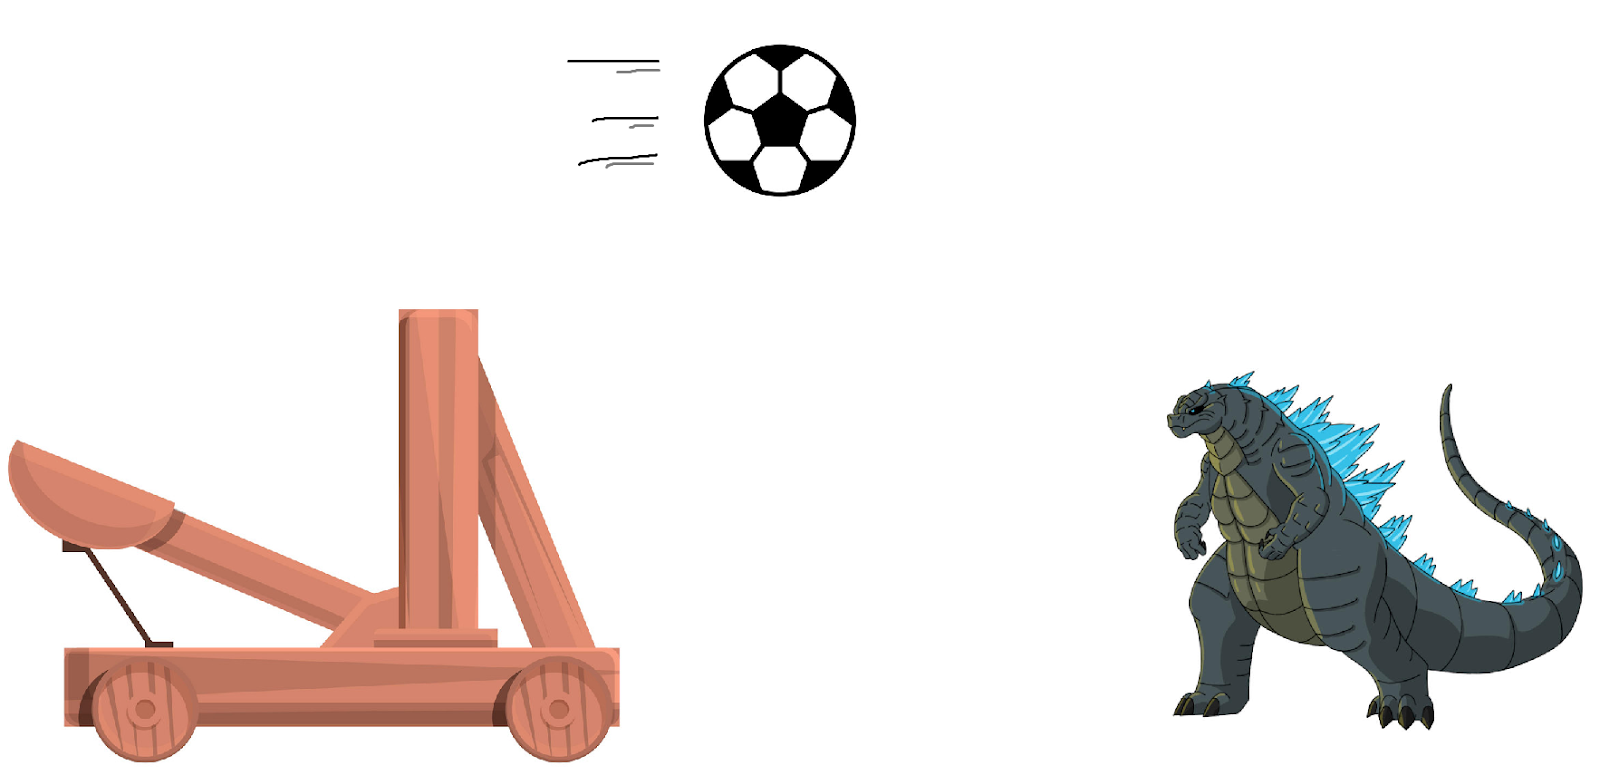 A catapult launching a soccer ball at a dinosaurish creature with an icy spine--all done with Clip Art images.